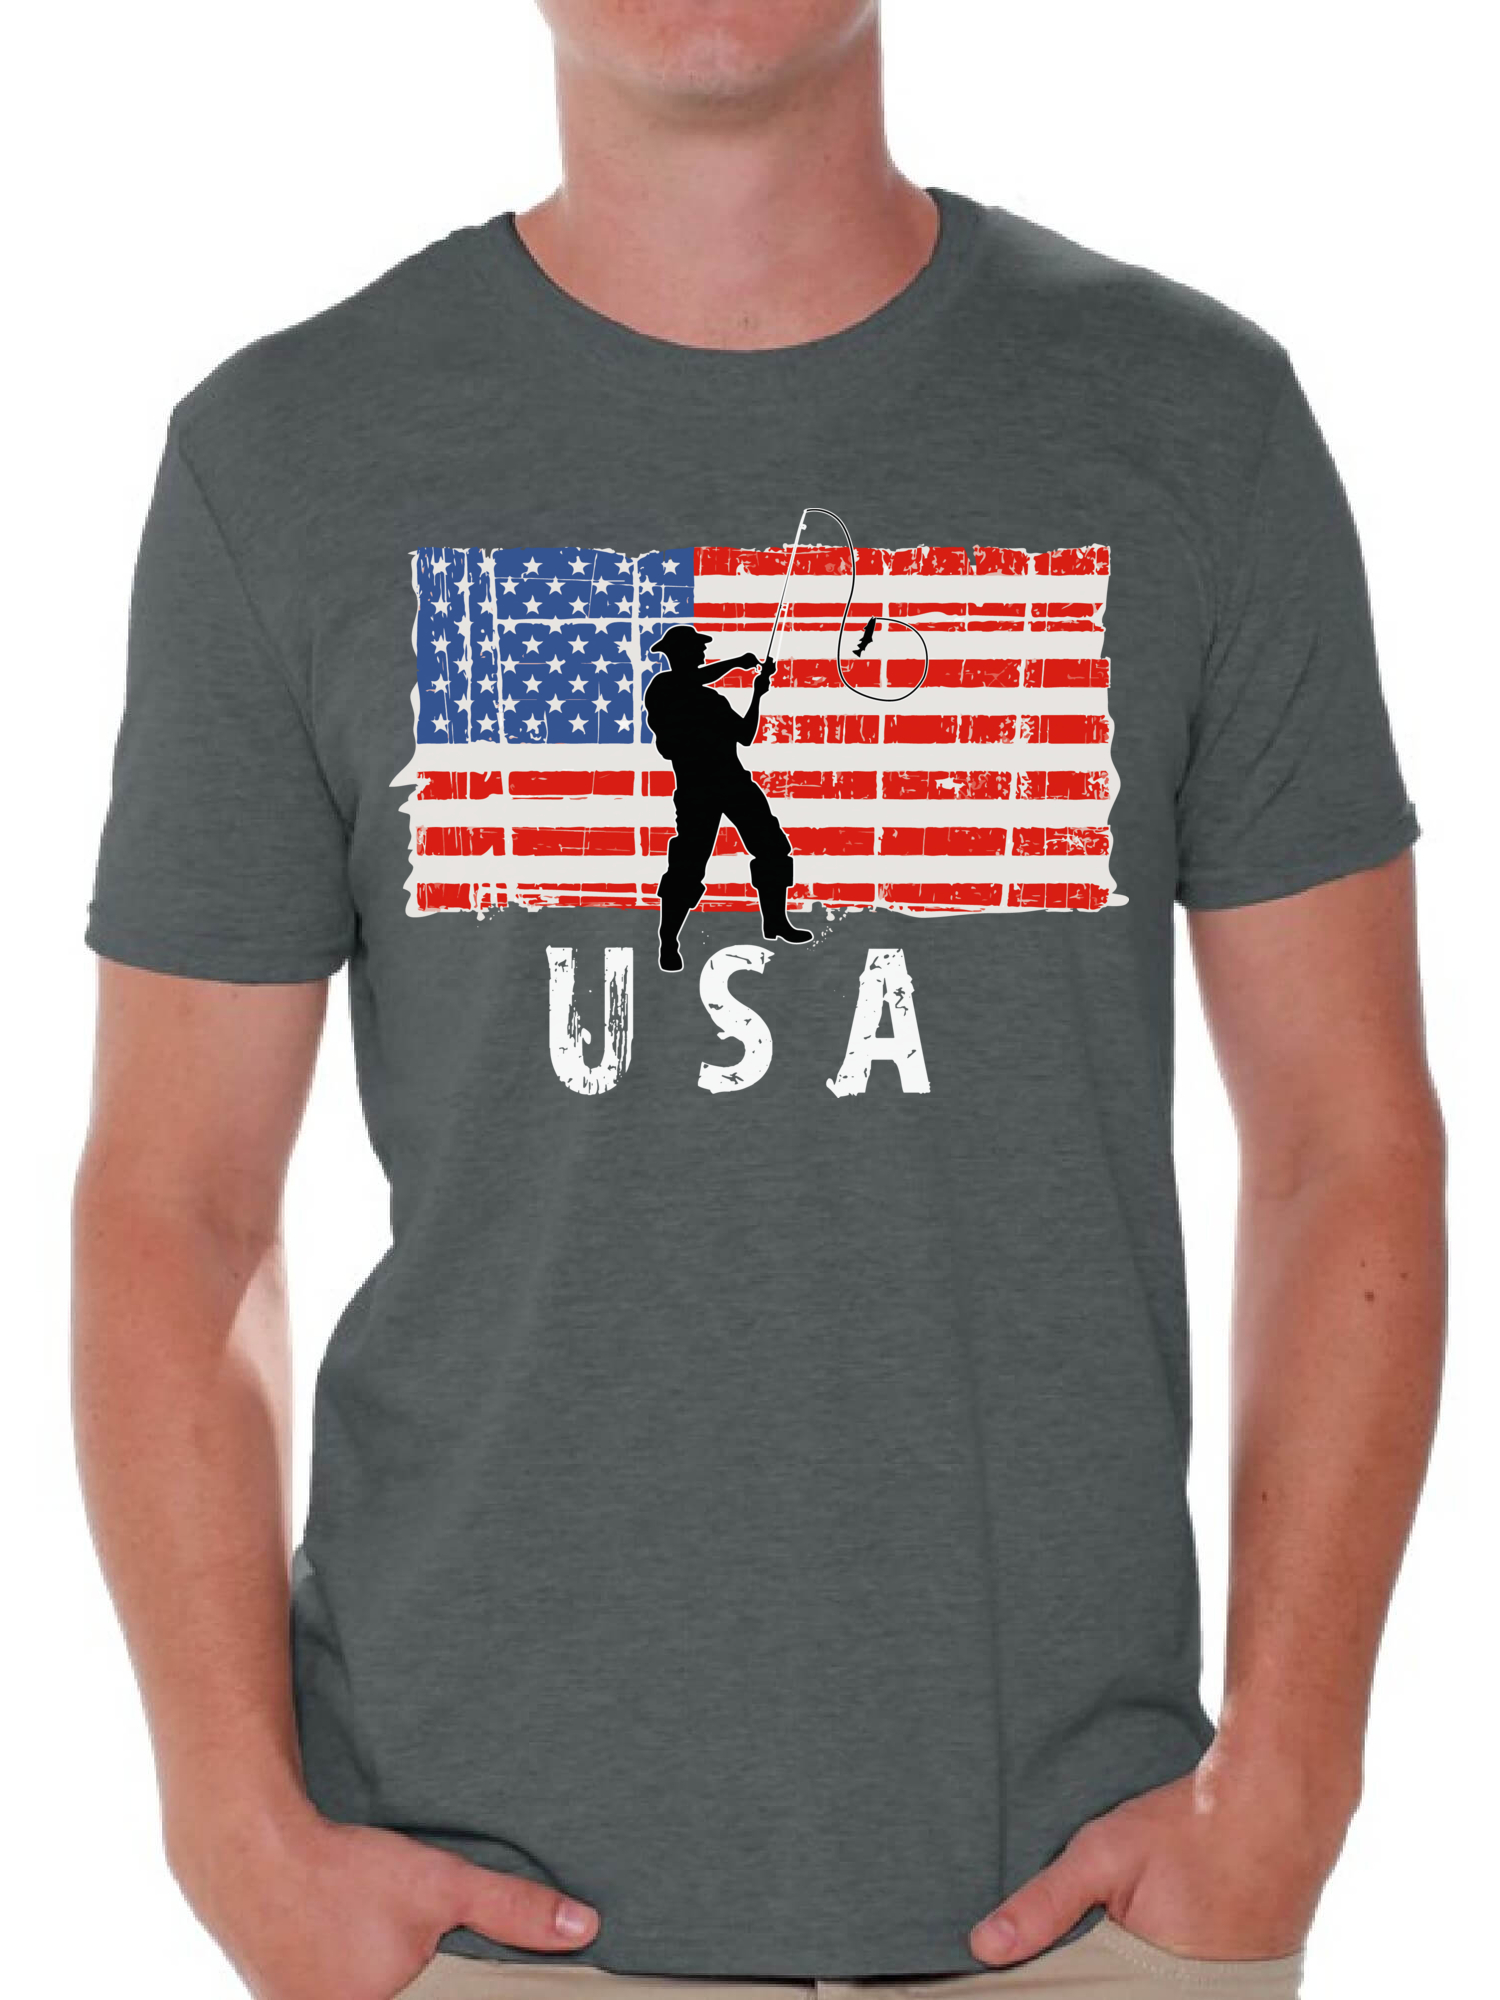 Awkward Styles Fishing USA Men Shirt Gifts for Men Retro USA T shirt for Men Fishing Gifts Pro America Men Tshirt 4th of July Gifts 4th of July T-shirt for Men Proud American Patriotic Men Shirts - image 1 of 4